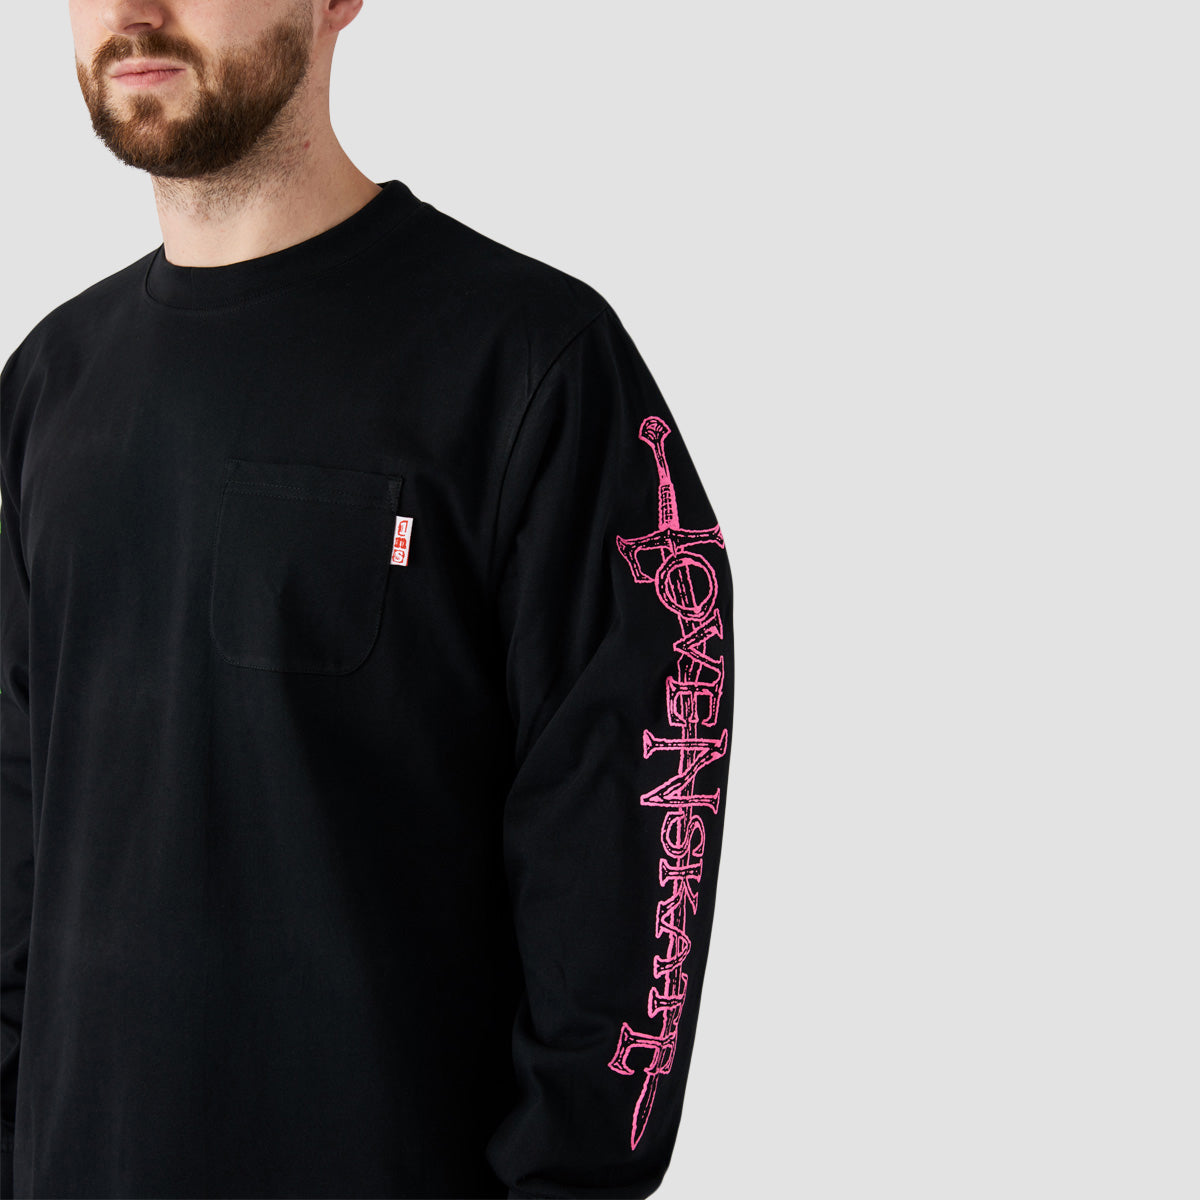 Lovenskate X Dungeon By French Longsleeve T-Shirt Black